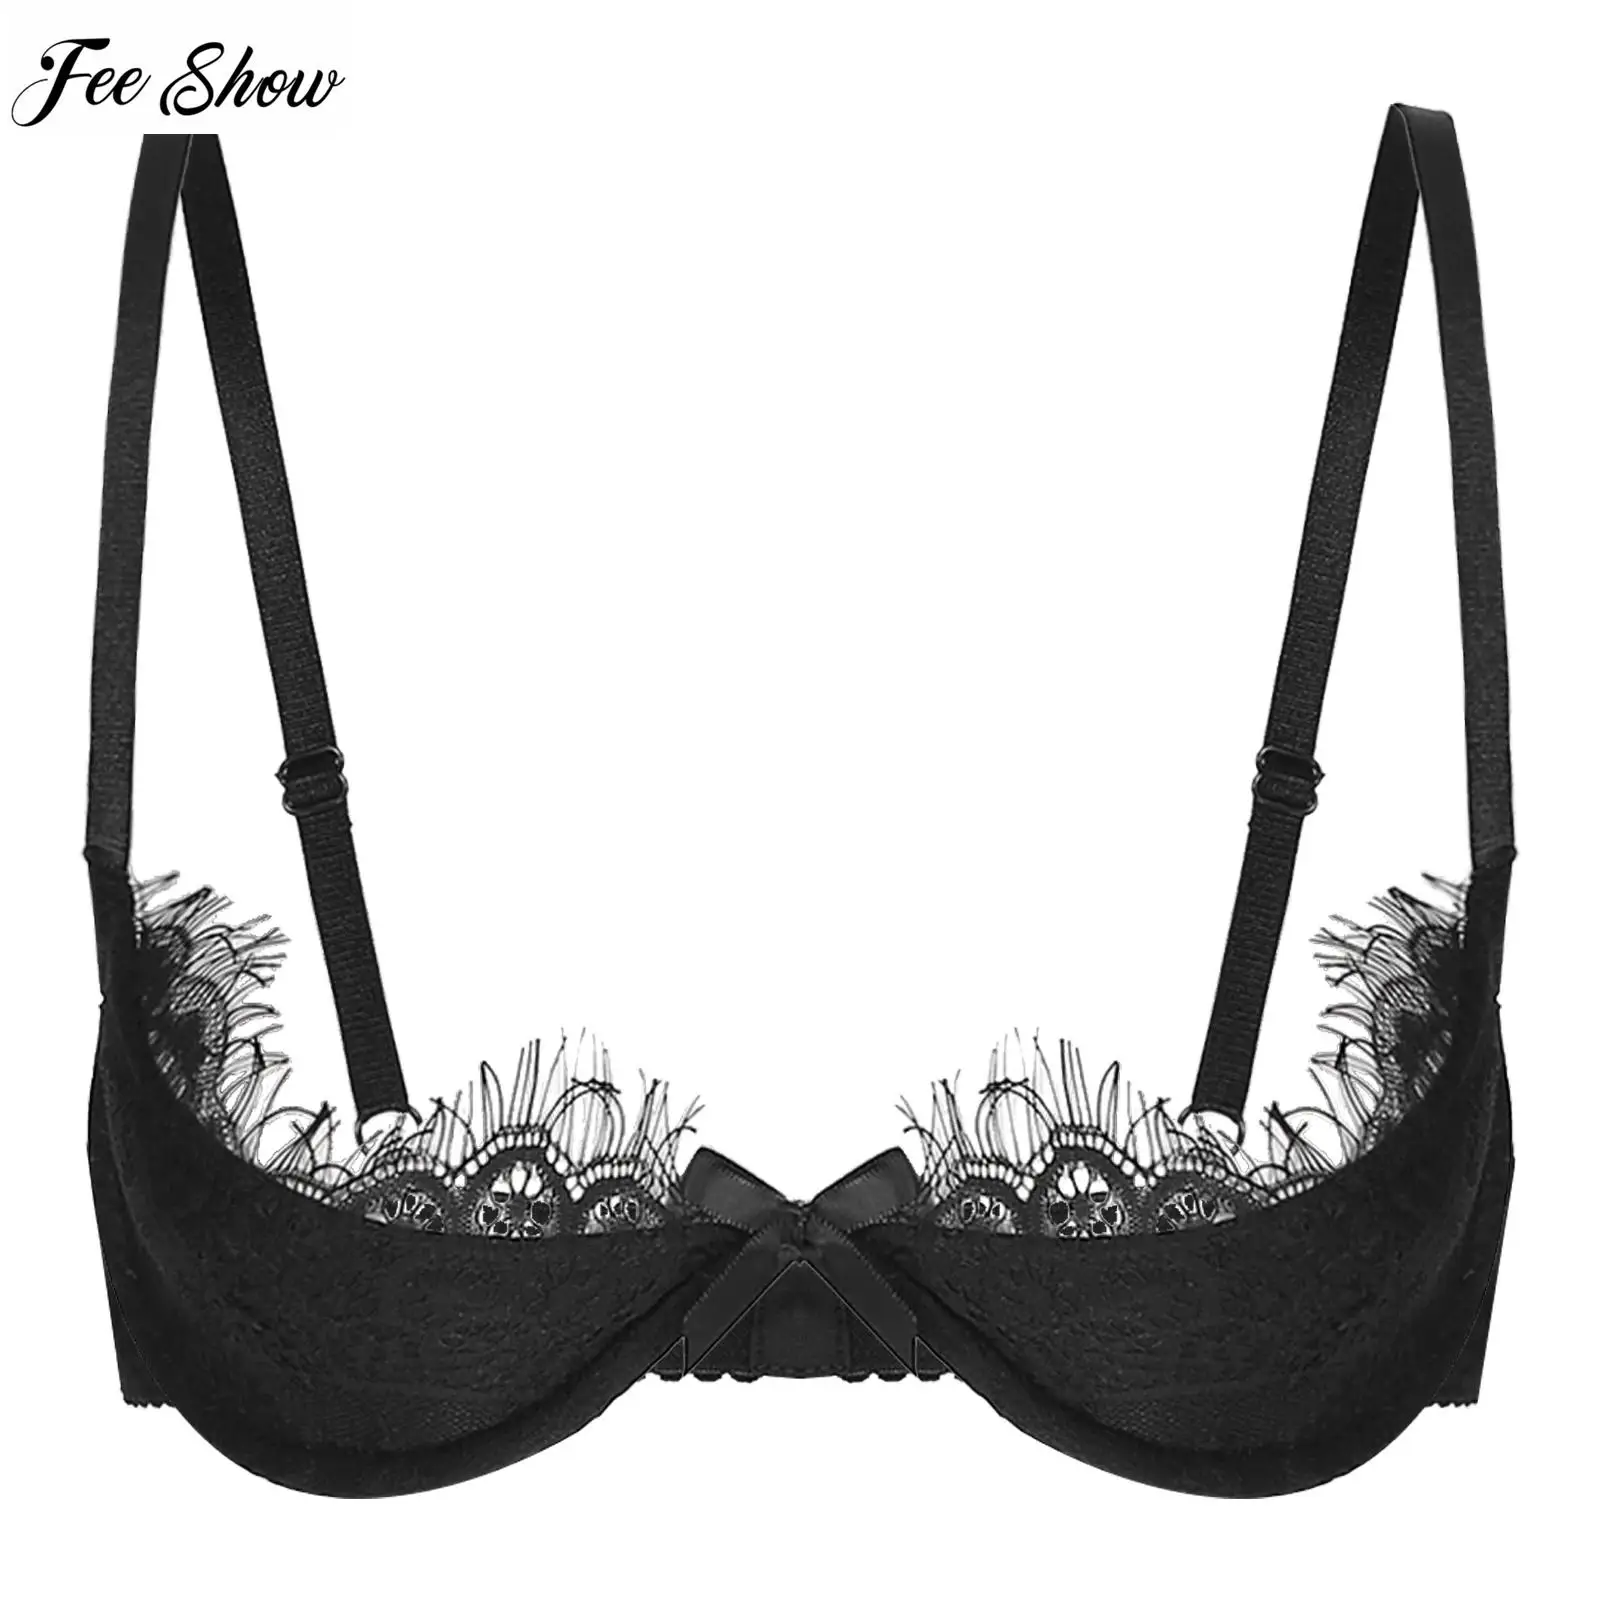 

Womens Lace Sheer 1/2 Cup Underwired Bra Tops Adjustable Spaghetti Straps Brassiere Lingerie Underwear